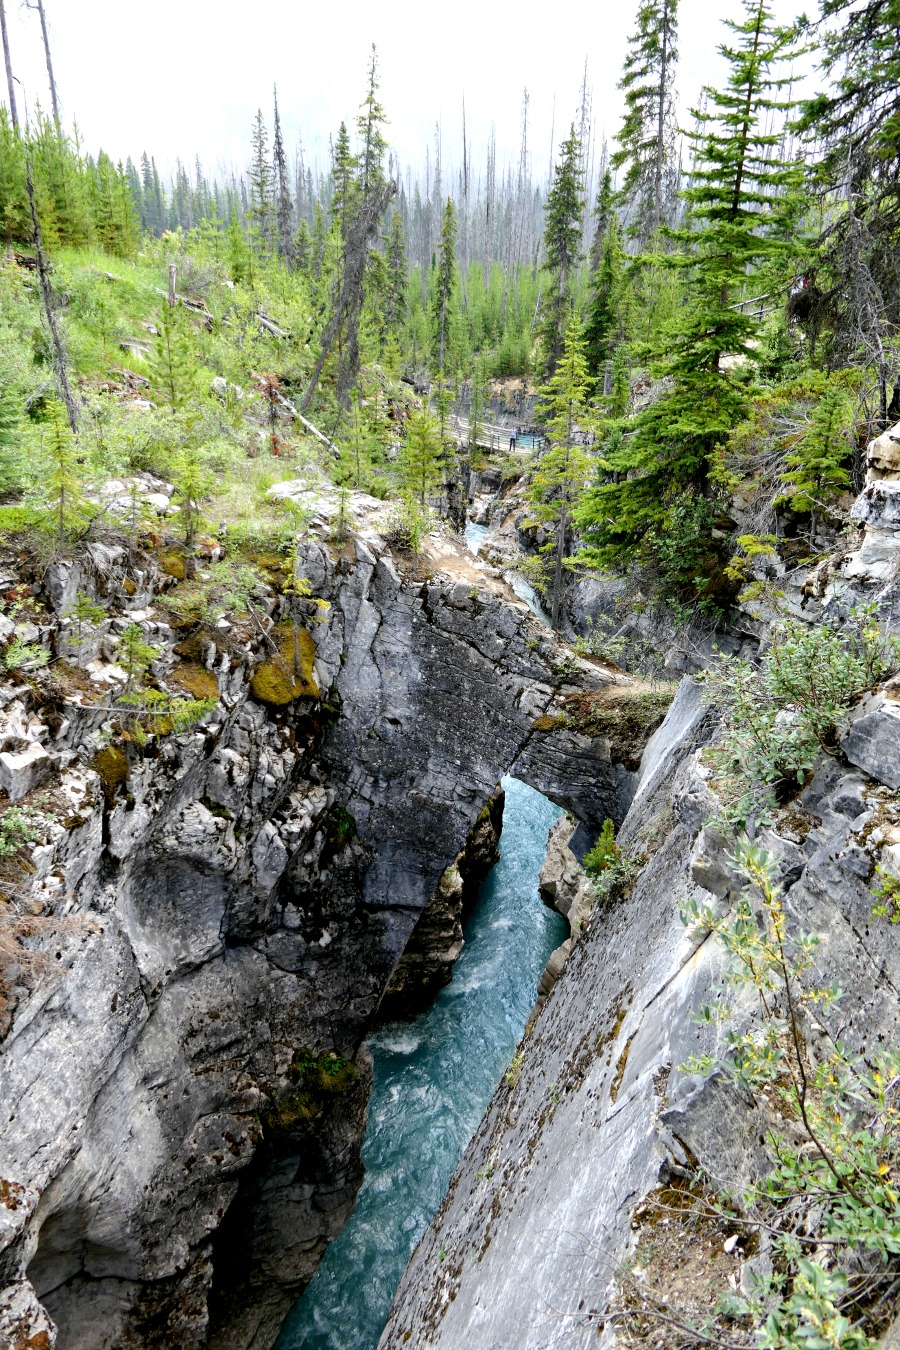 Marble Canyon offers some of the most spectacular scenery you will ever see.